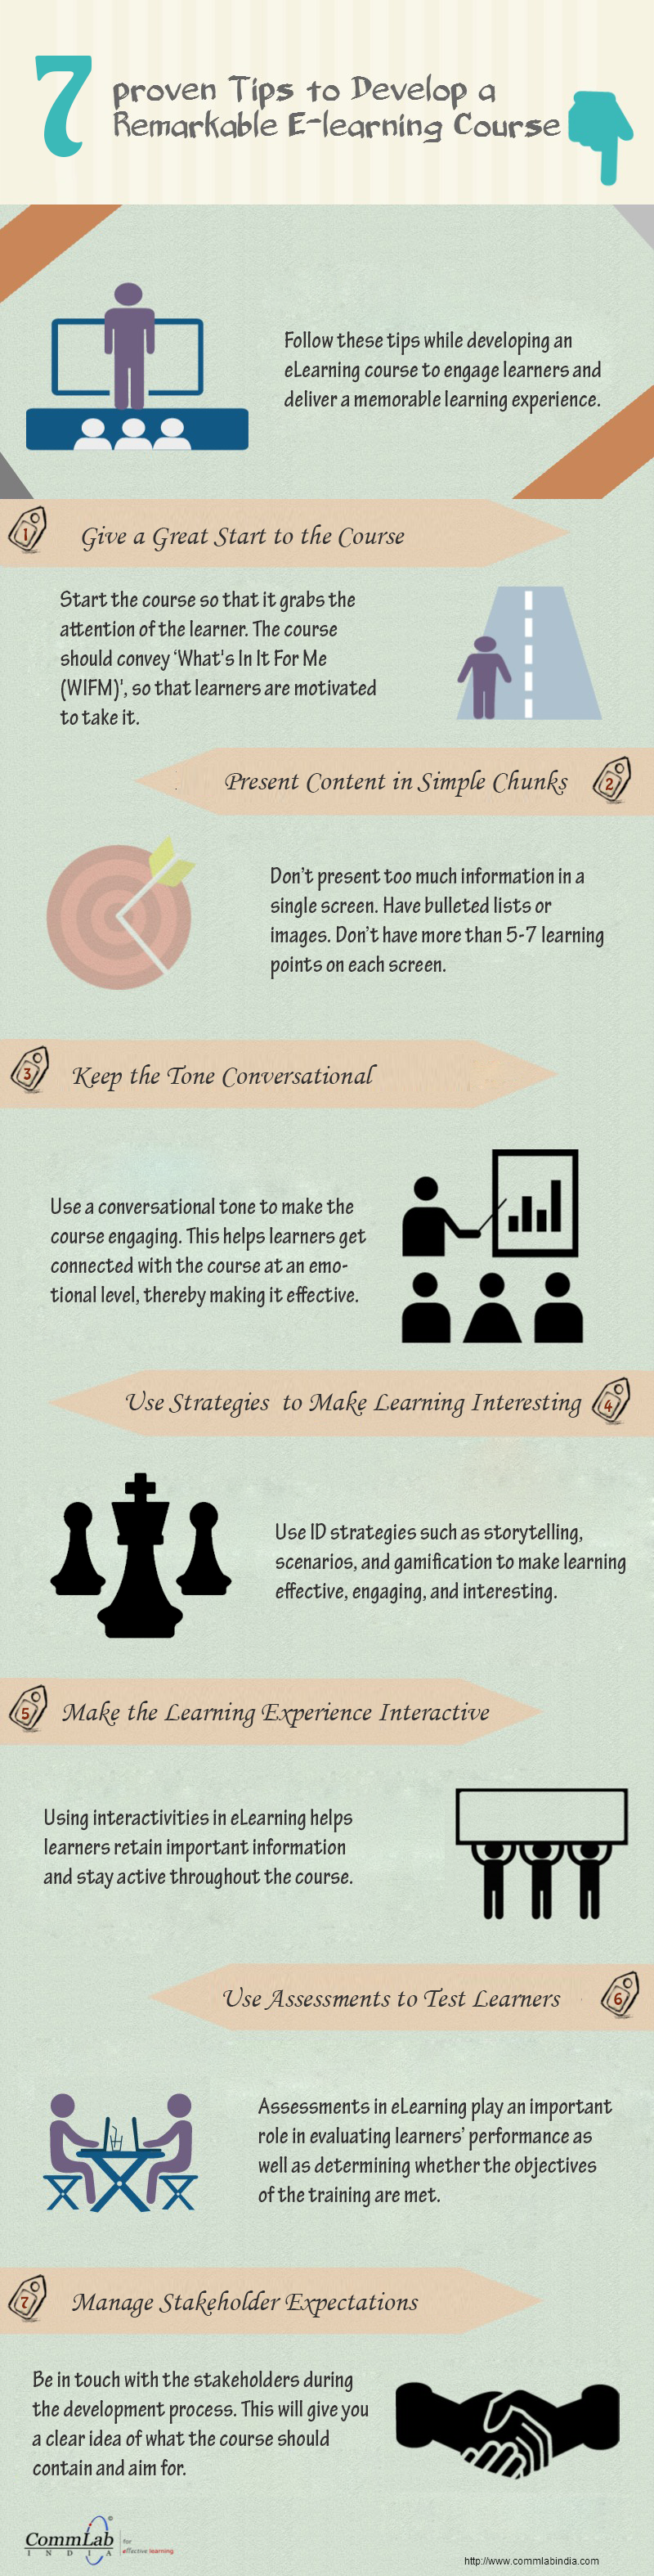 7 Proven Tips to Develop a Remarkable E-learning Course [Infographic]